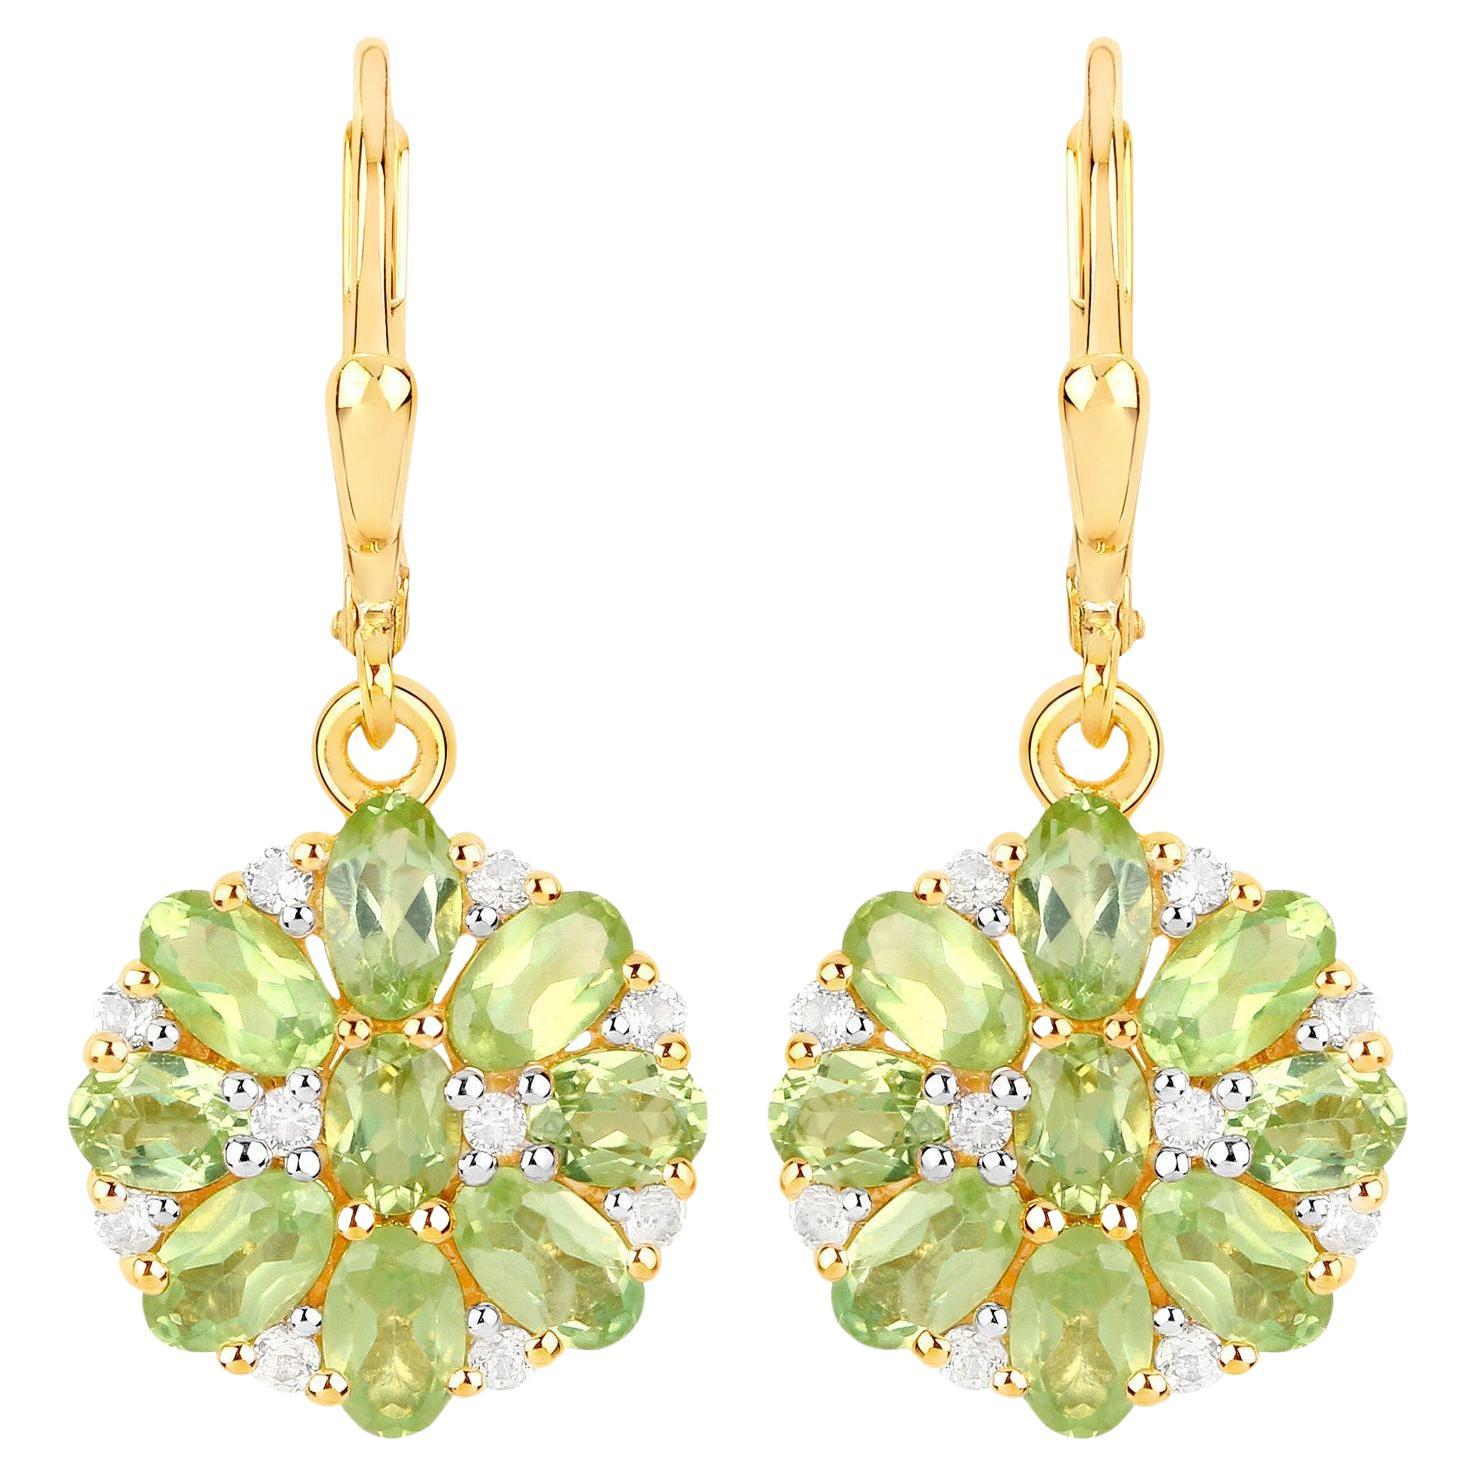 Natural Peridot Cluster Earrings White Topaz 4.2 Carats 18K Gold Plated Silver